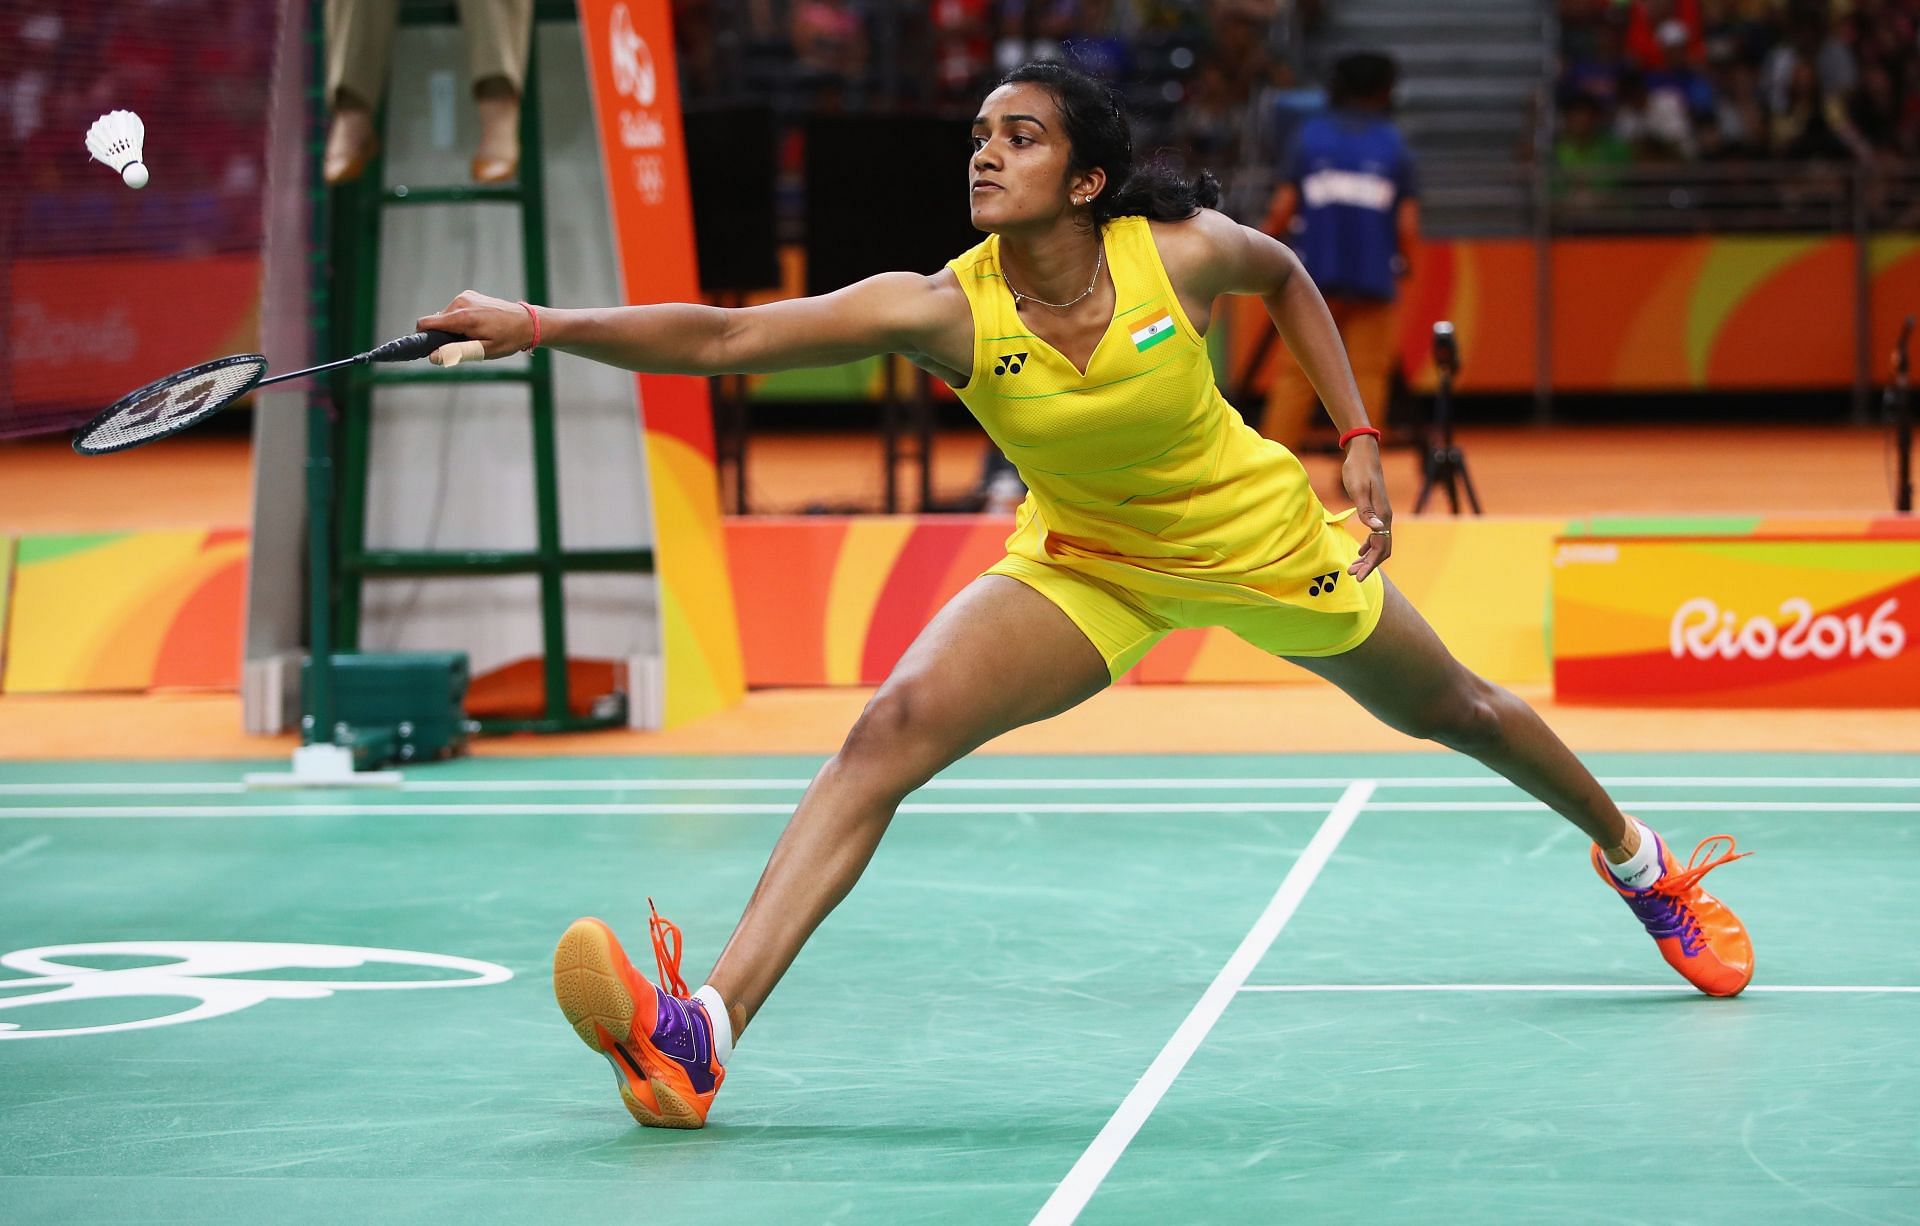 Badminton - Olympics: Day 14 PV Sindhu in action